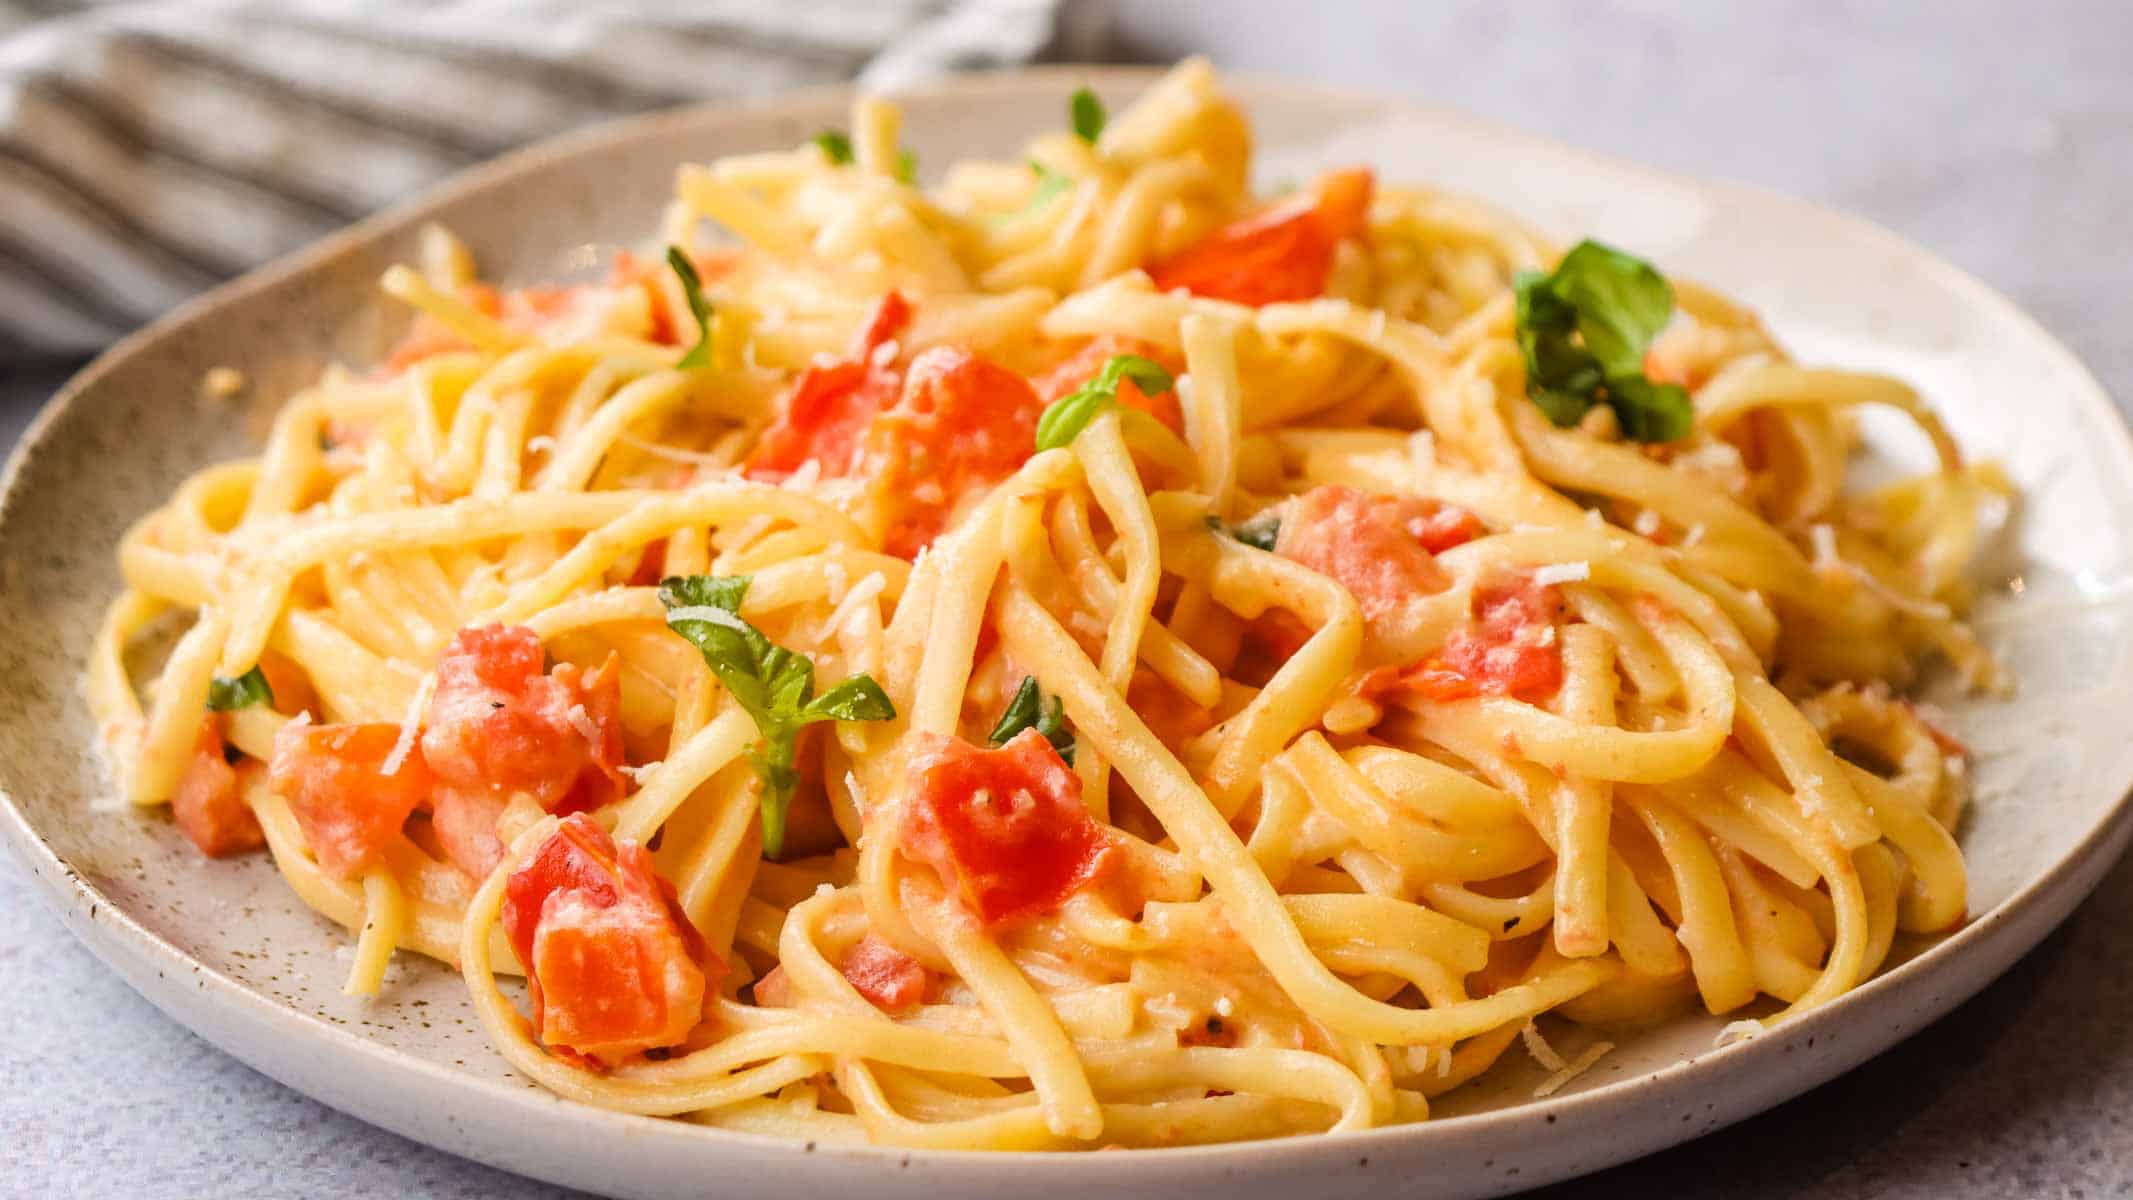 A plate of pasta with tomato alfredo